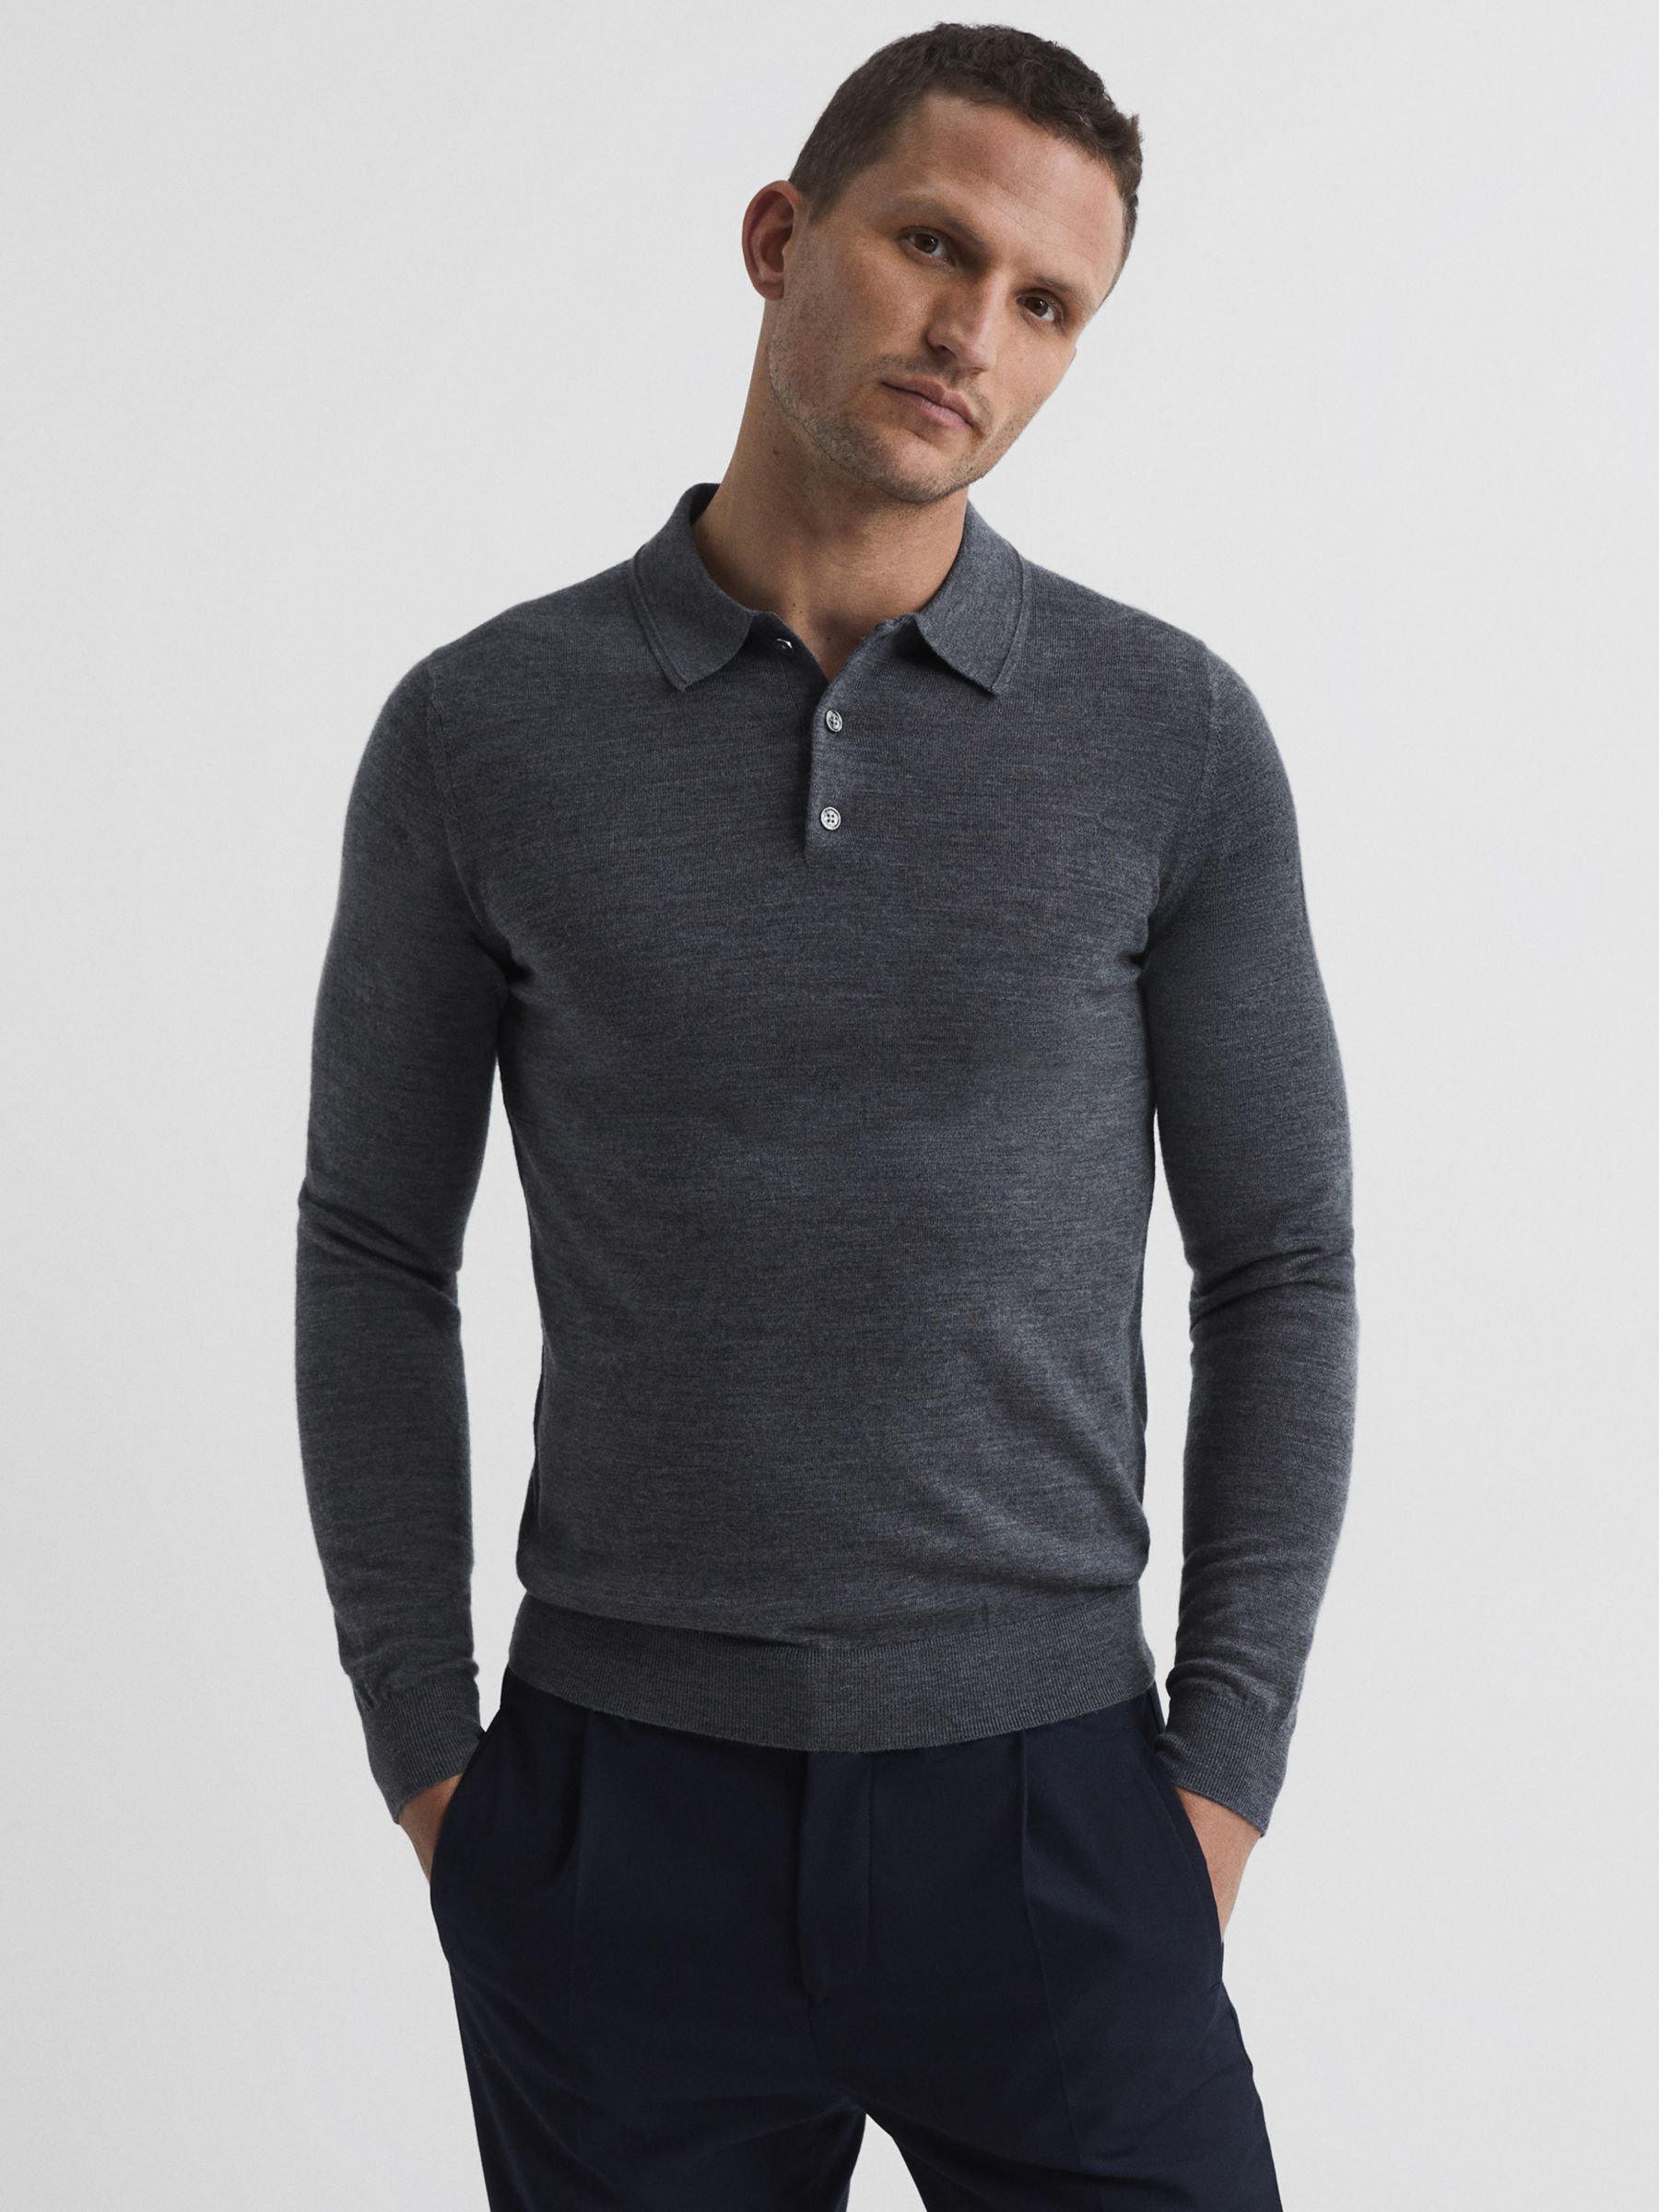 Reiss Mid Grey Wool Partners Lewis Knitted Trafford John Sleeve Long Melange at Top, & Polo